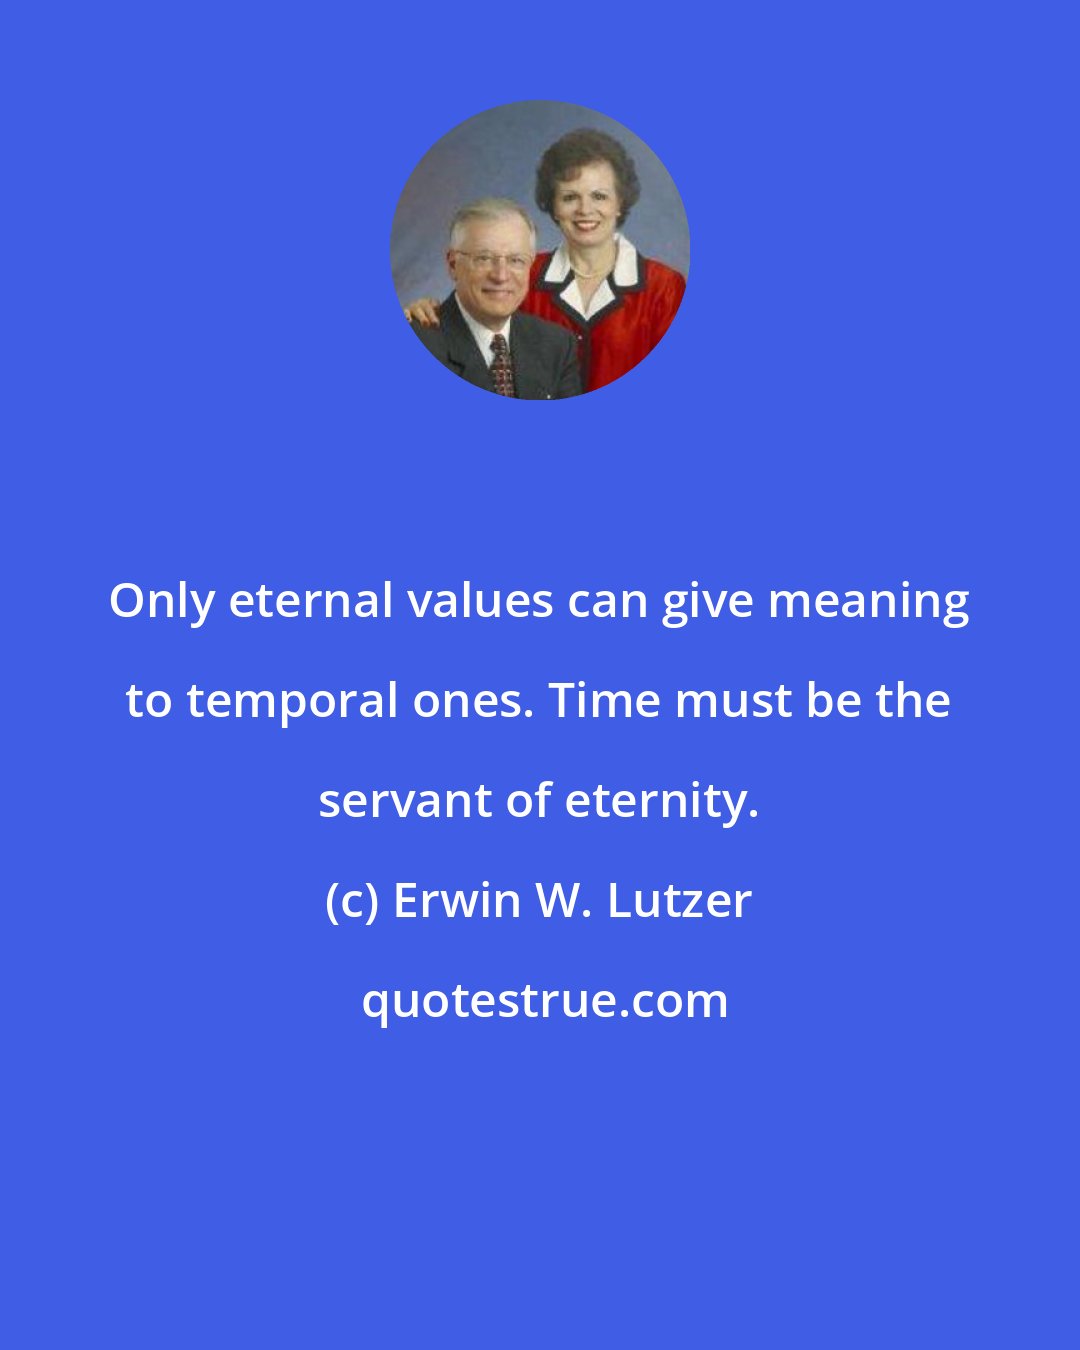 Erwin W. Lutzer: Only eternal values can give meaning to temporal ones. Time must be the servant of eternity.